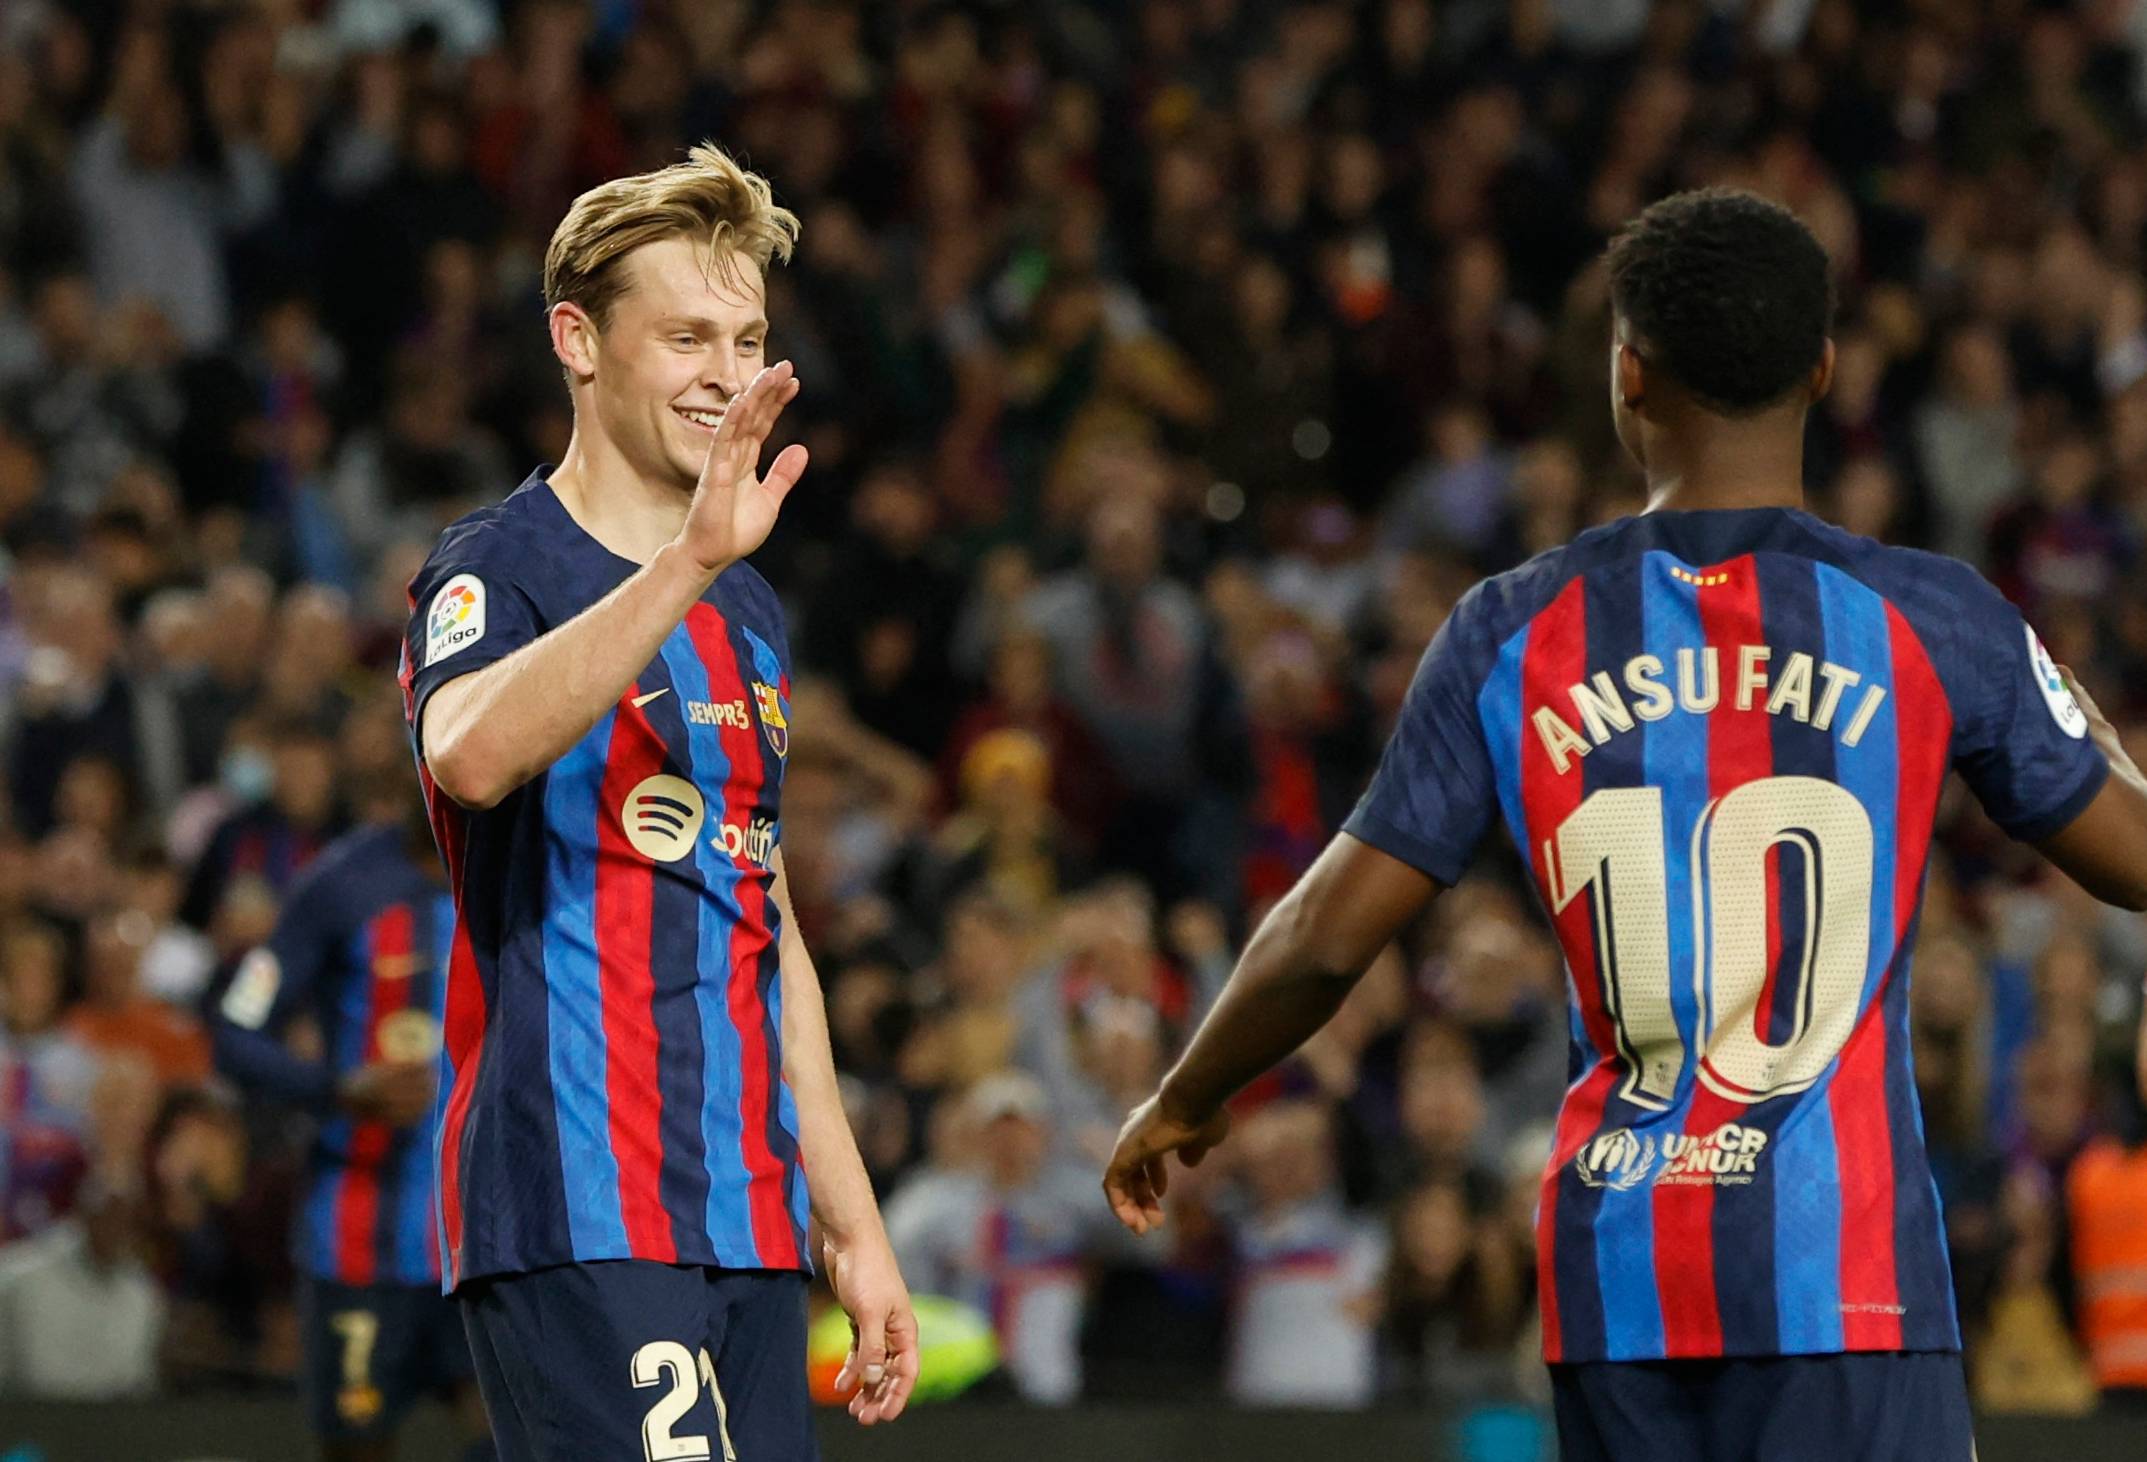 Manchester United: Frenkie de Jong move looking unlikely - Follow up